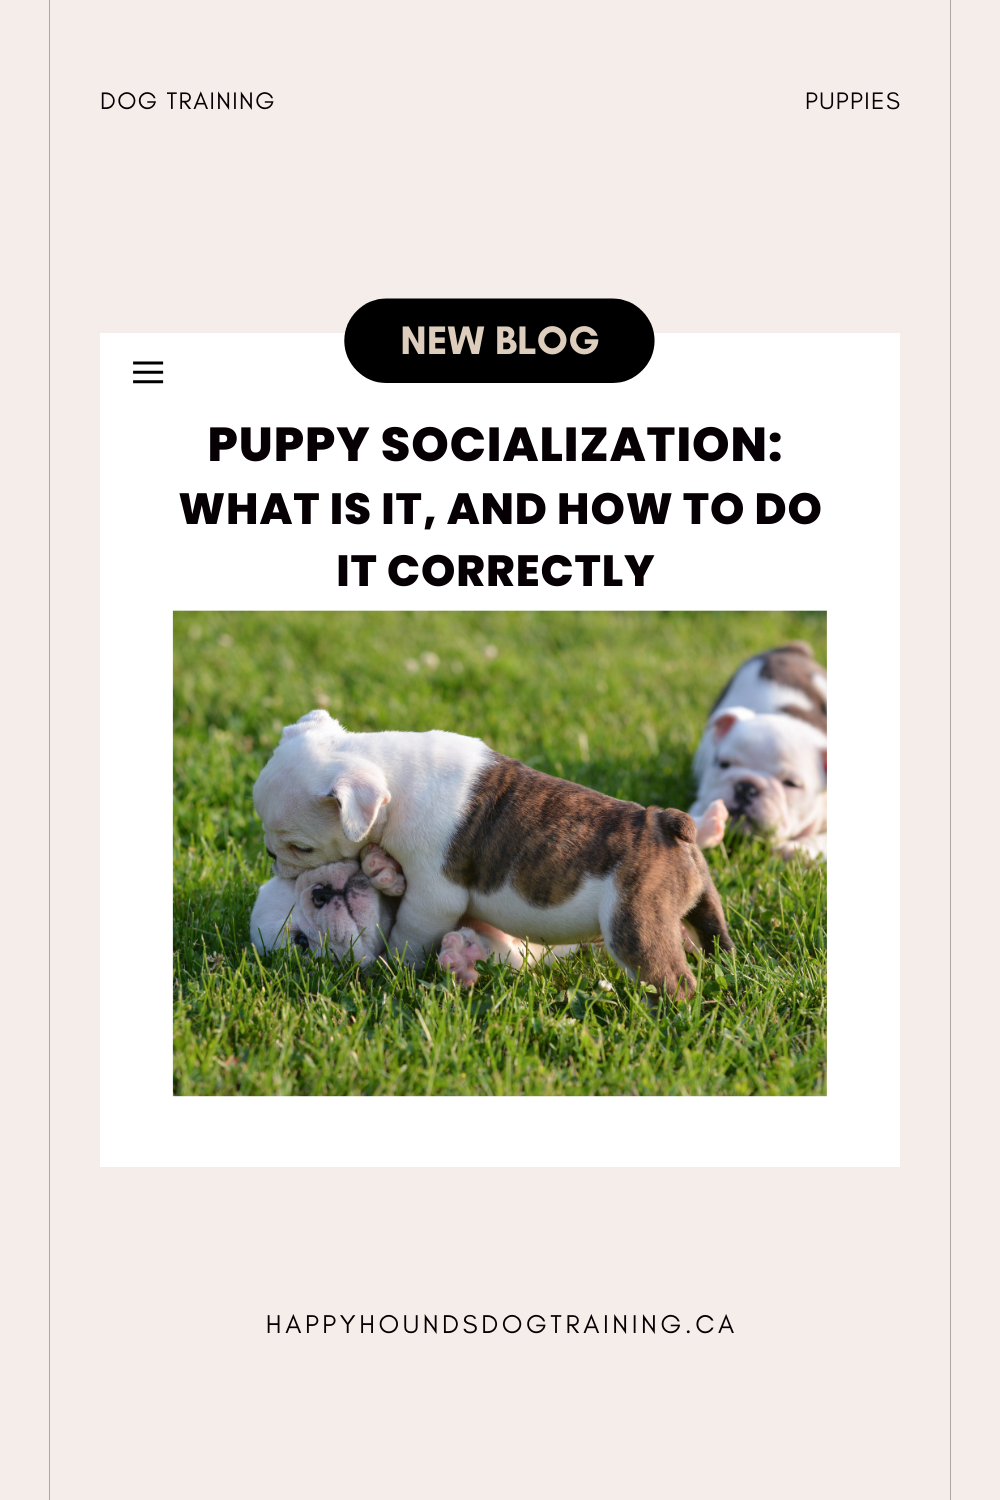 Puppy Socialization What Is It, and How to Do It Correctly